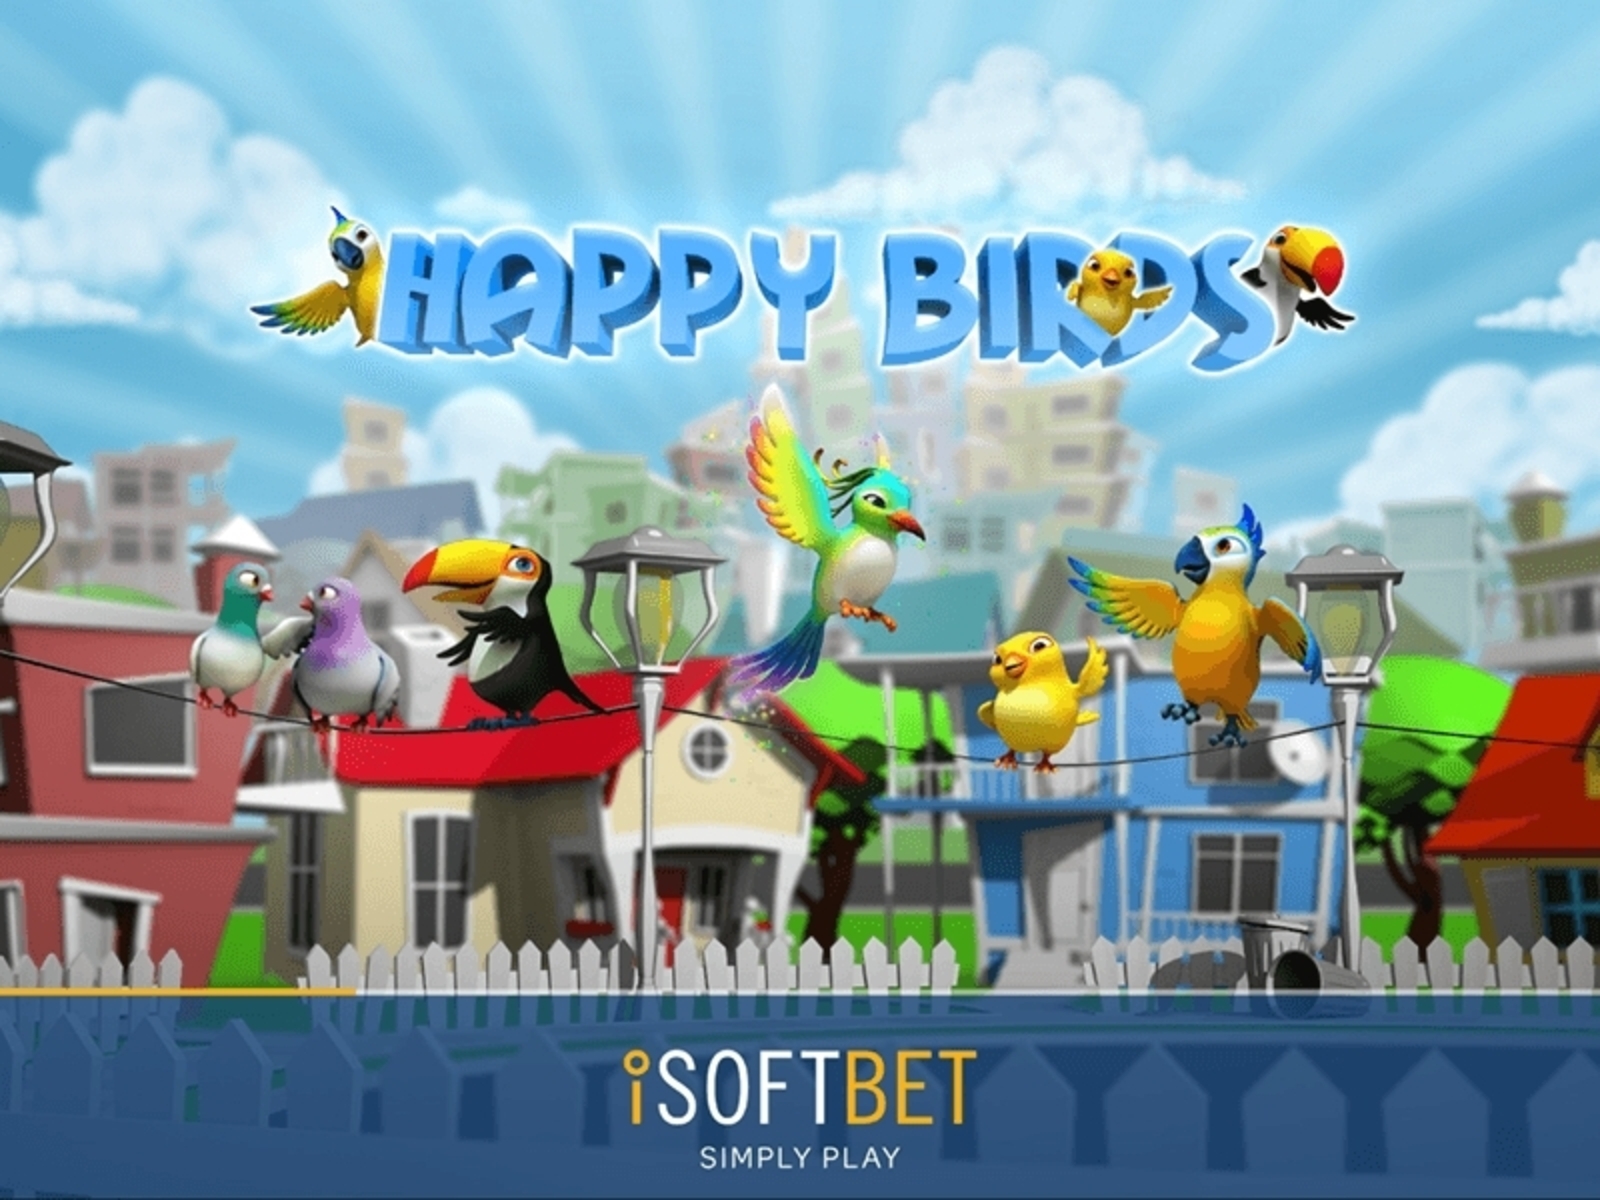 The Happy Birds Online Slot Demo Game by iSoftBet